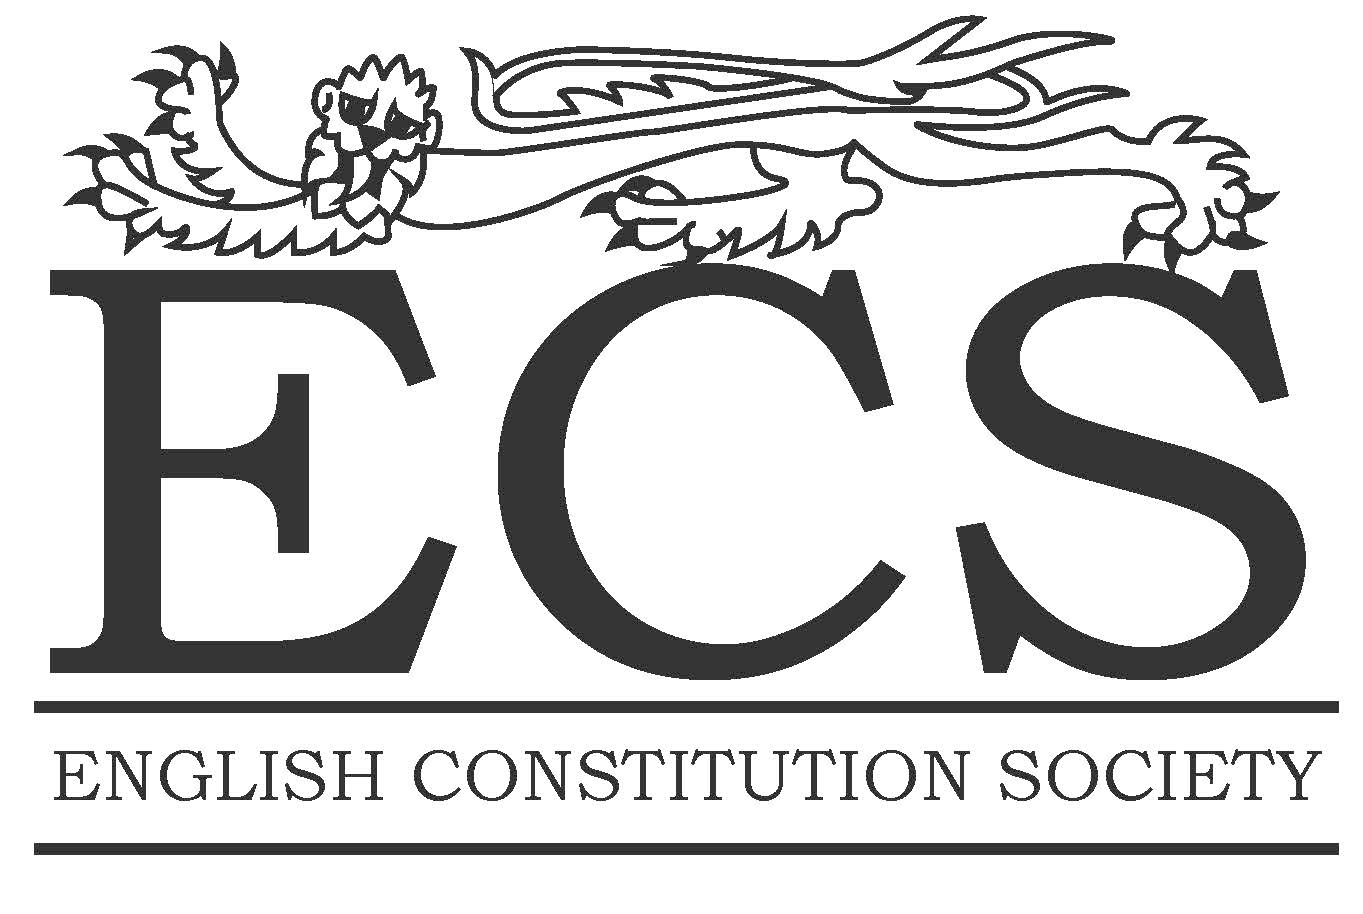 English Constitution Society